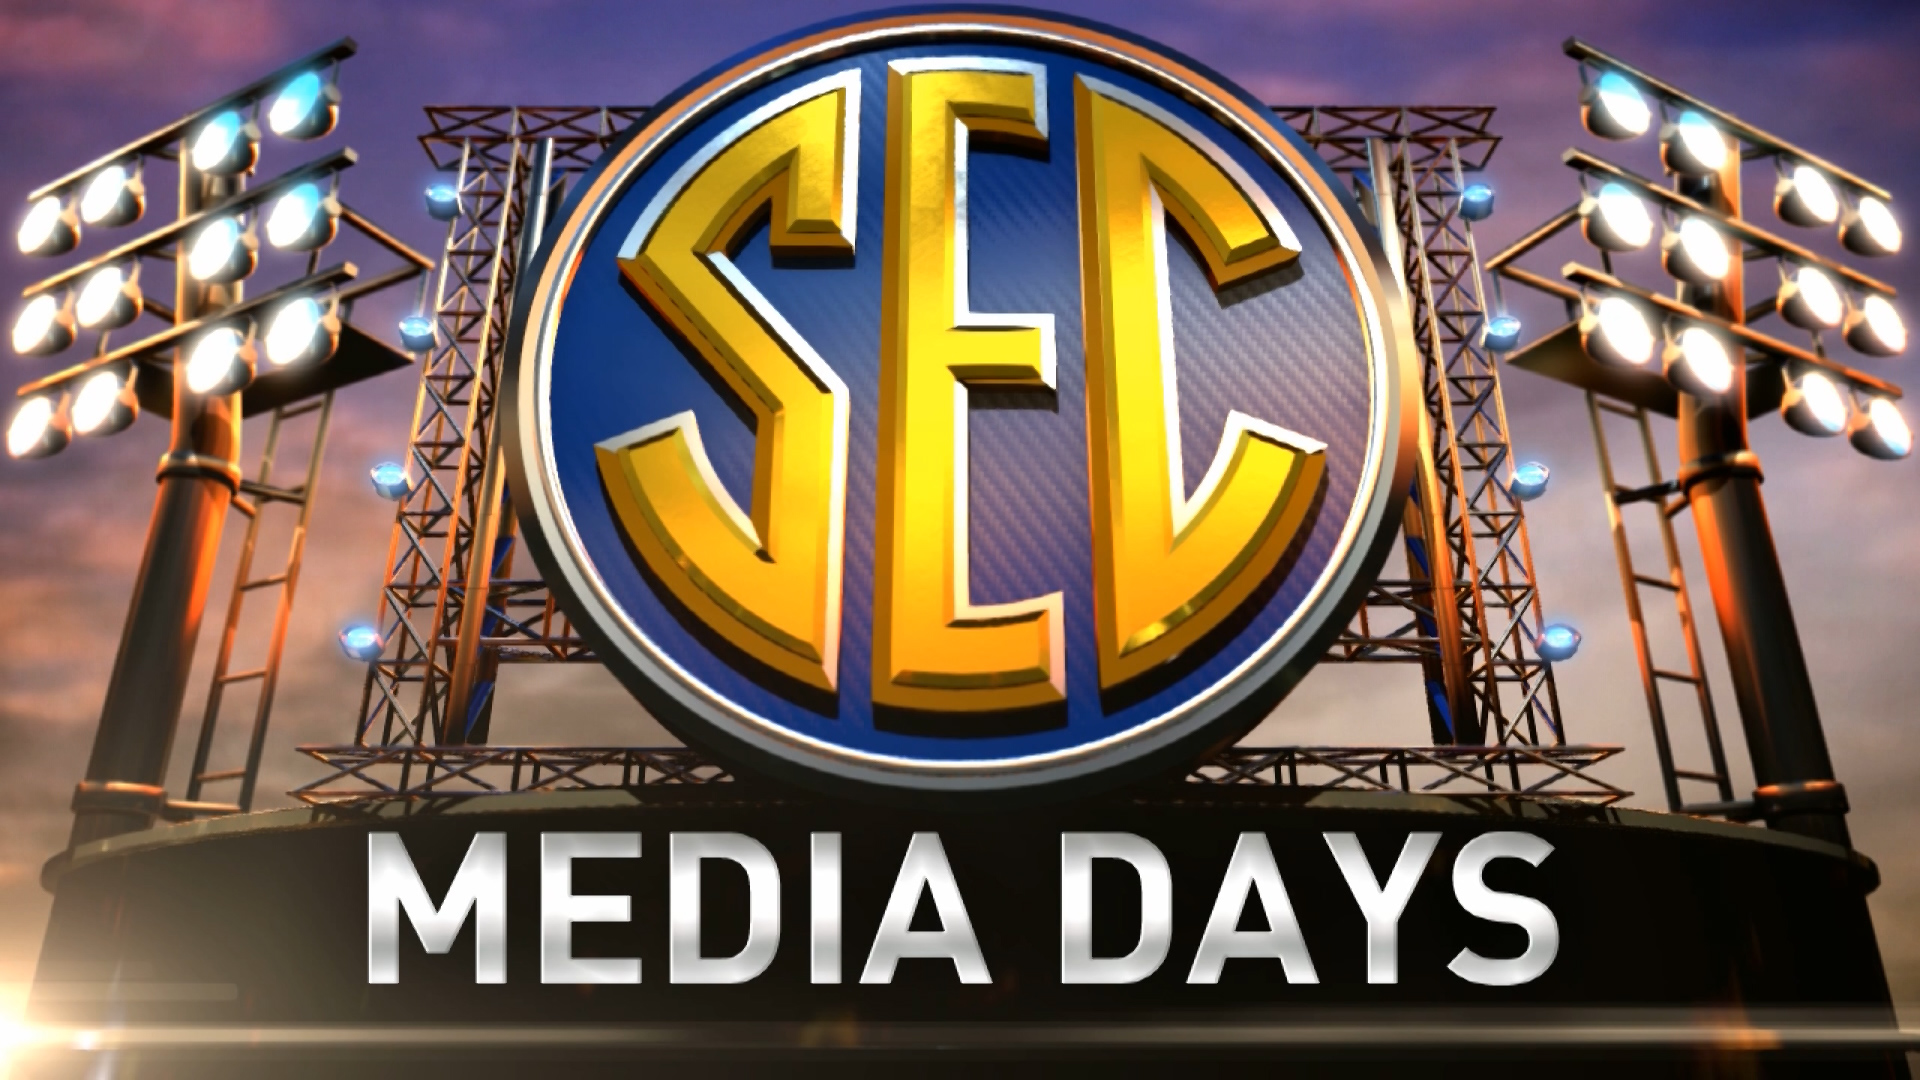 Get to know the three Alabama football players attending SEC Media Days